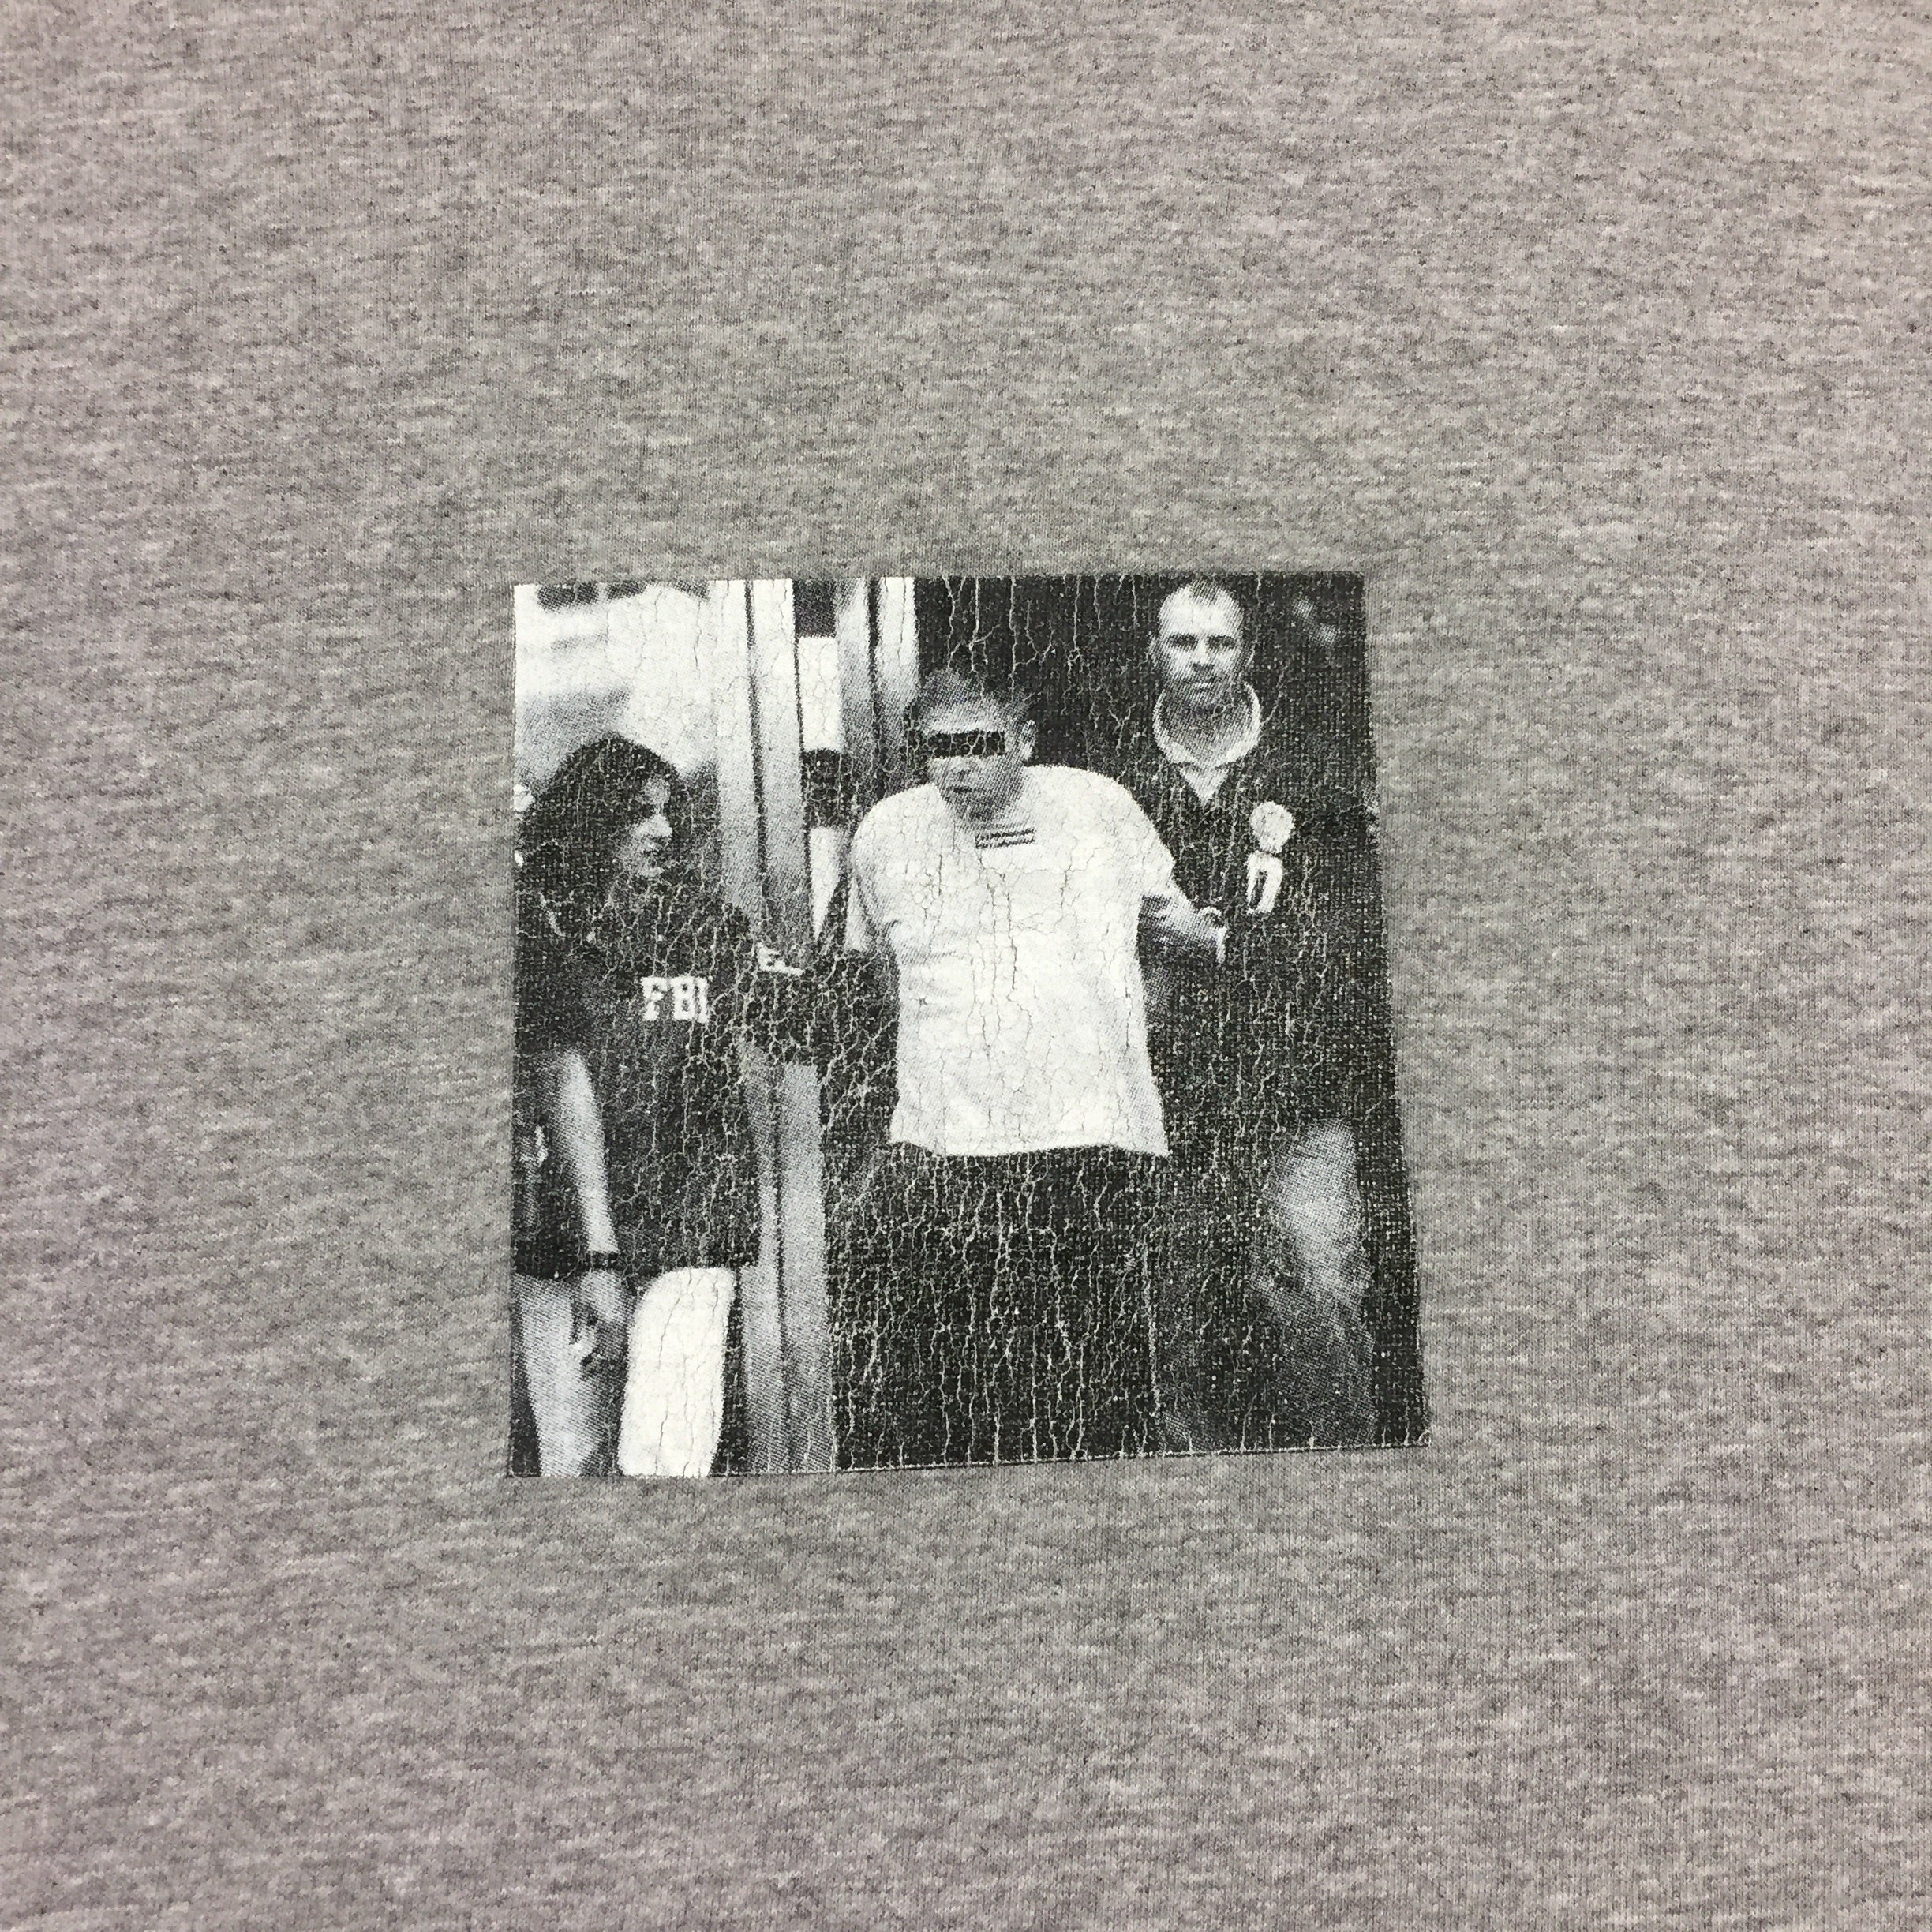 2005 Supreme Illegal Business Controls America Grey Tee